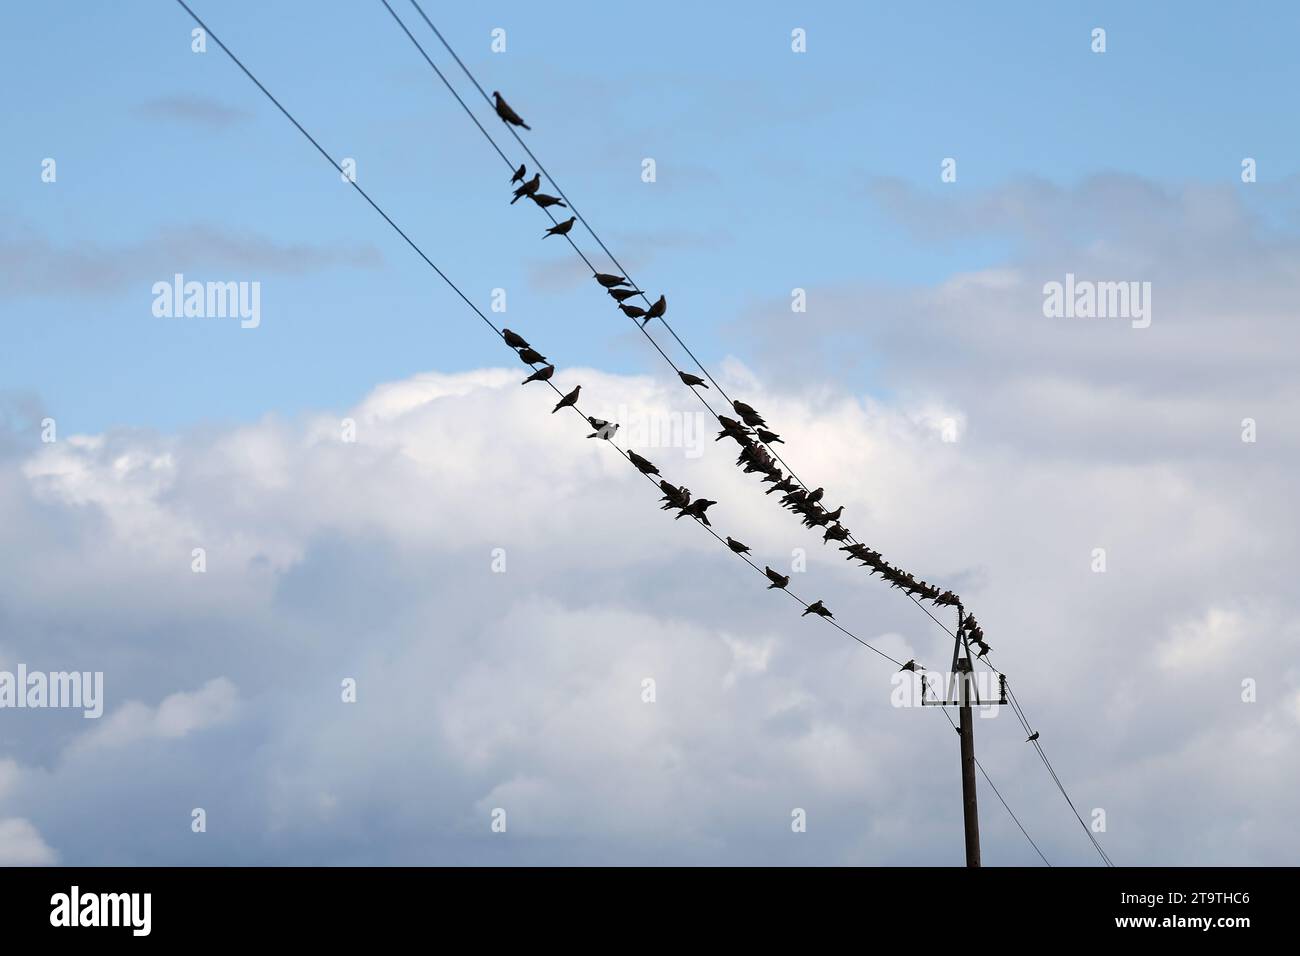 A flock of birds sit on the overhead power lines. Stock Photo